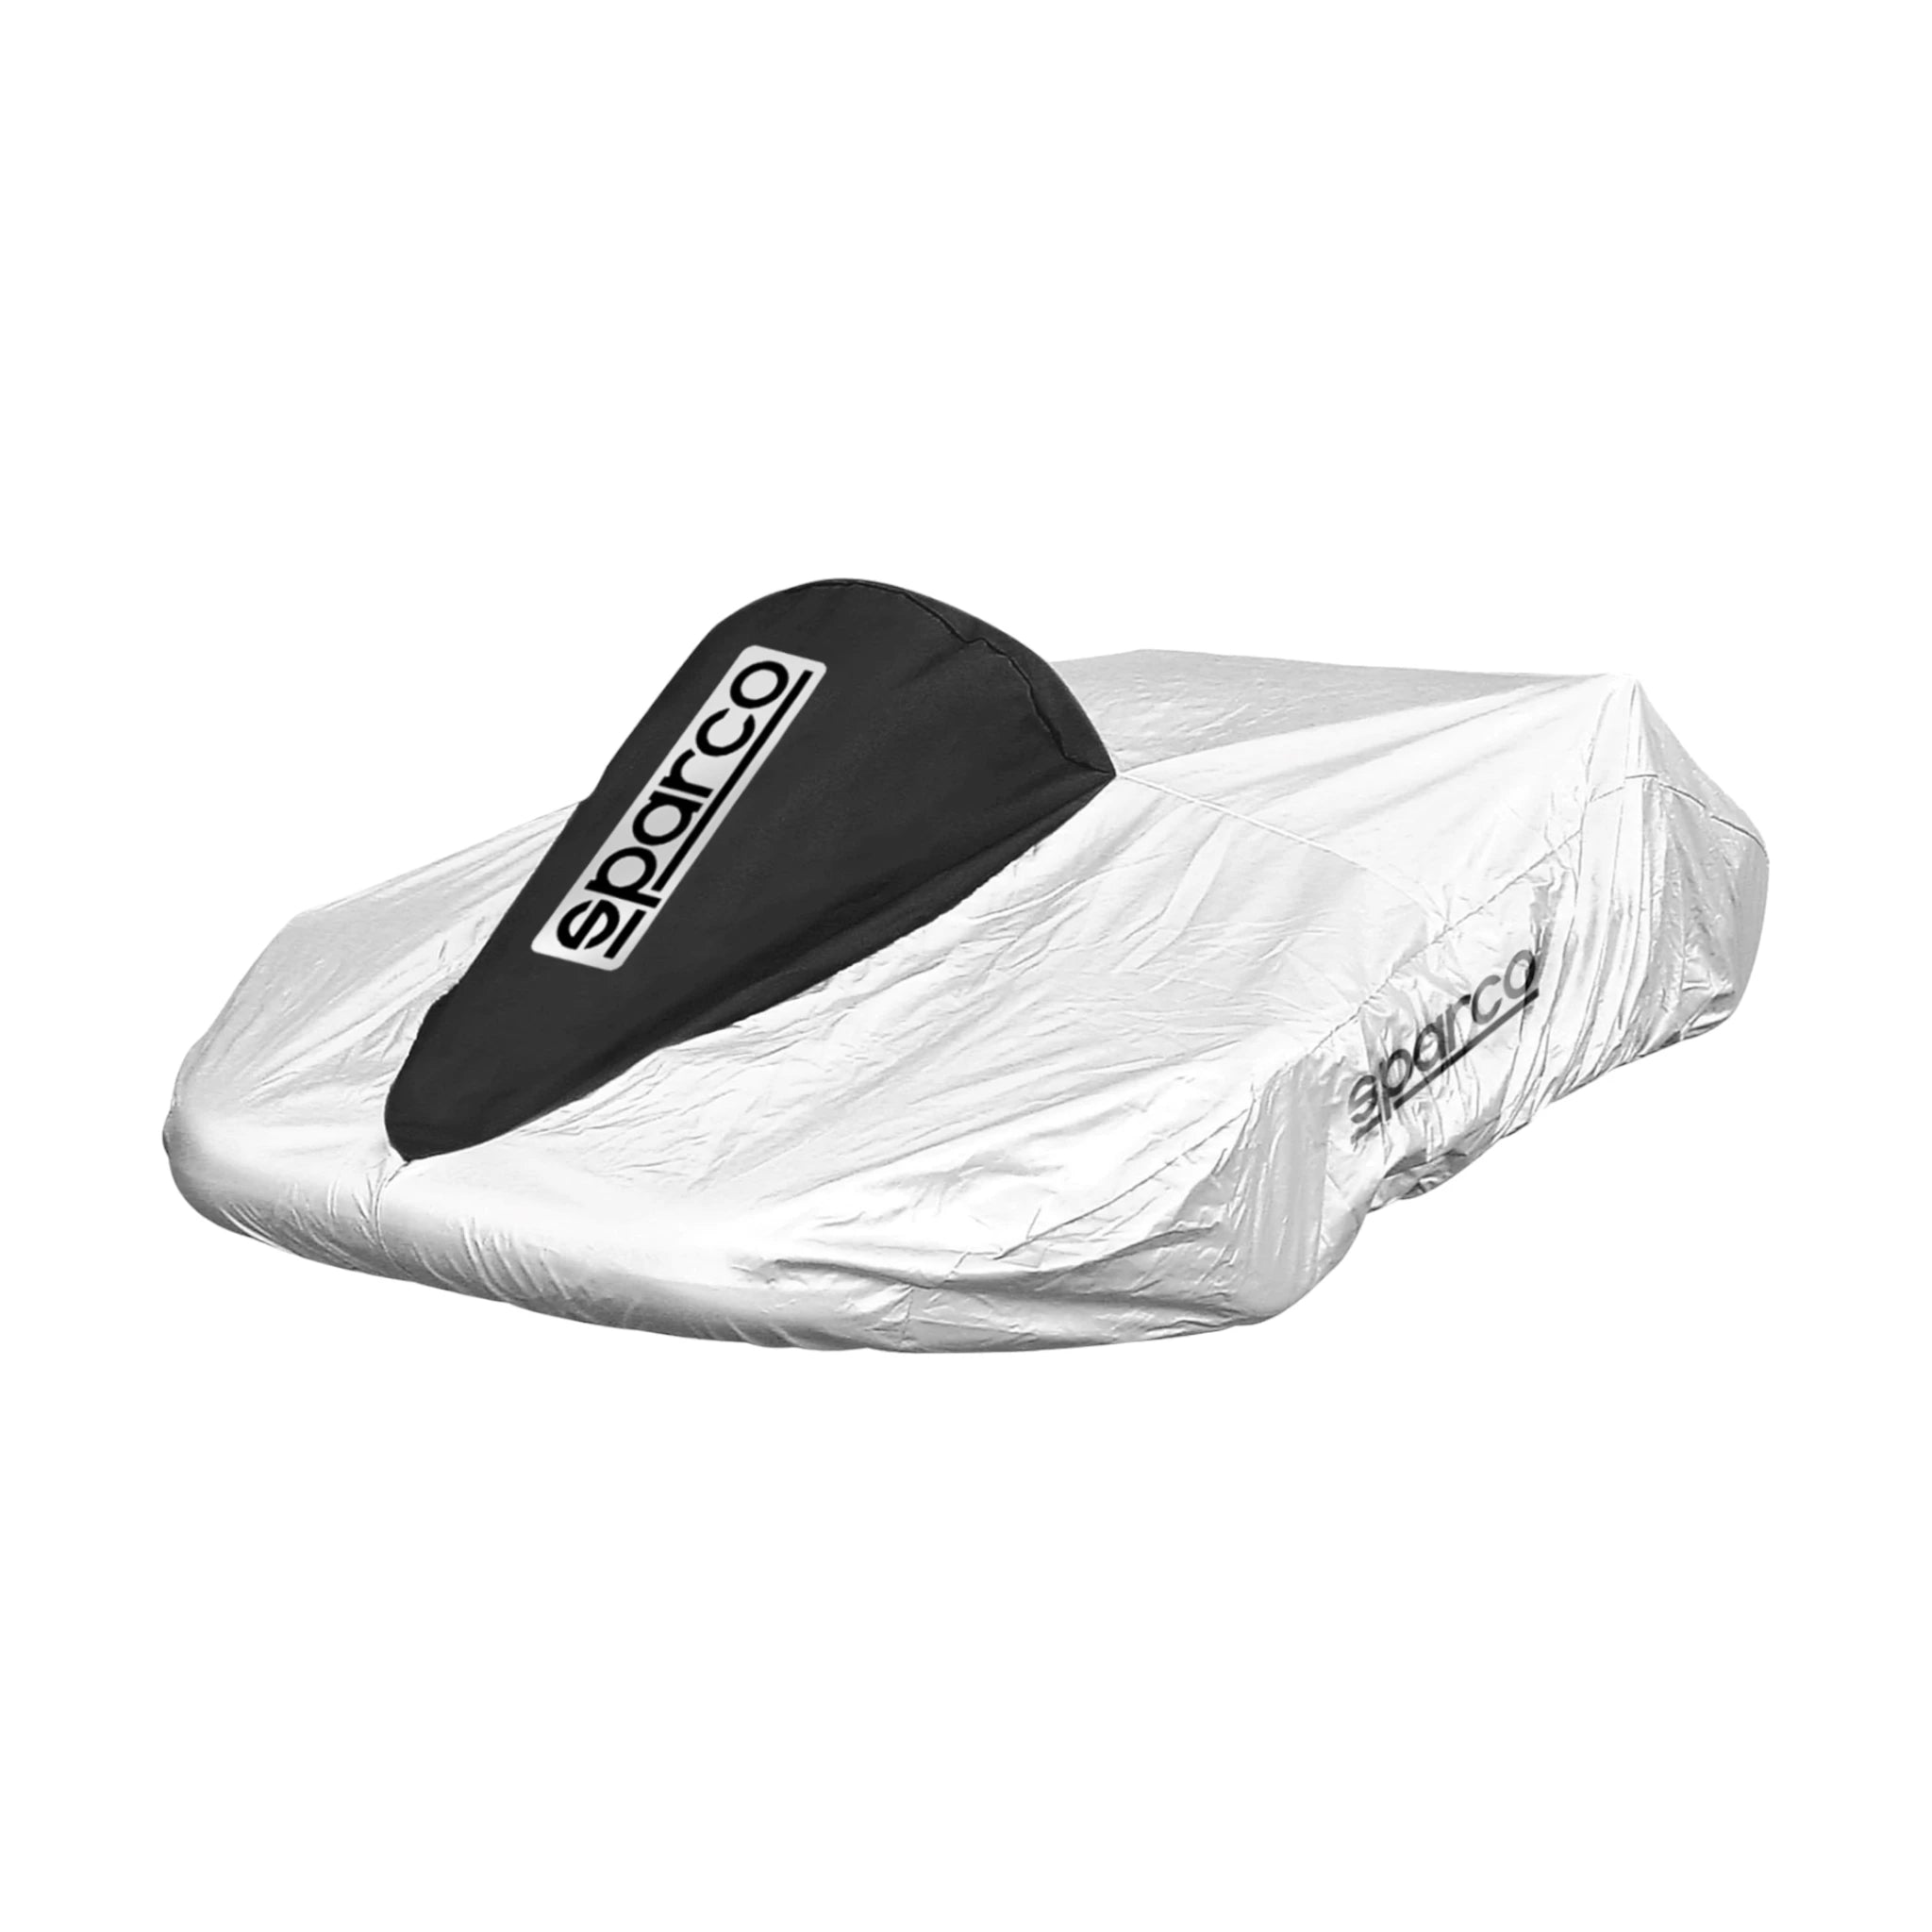 SPARCO KART COVER